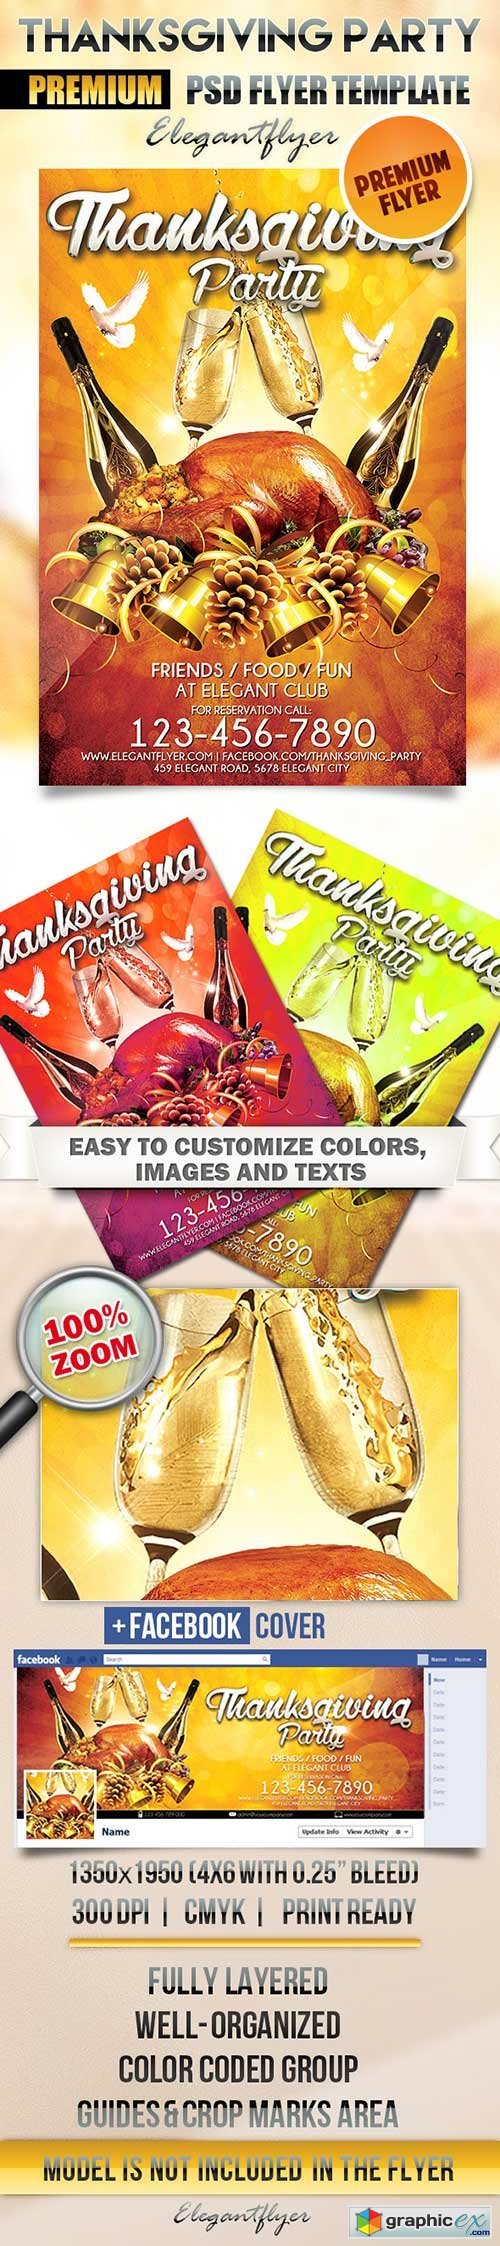 Thanksgiving Party Night Flyer PSD Template + Facebook Cover